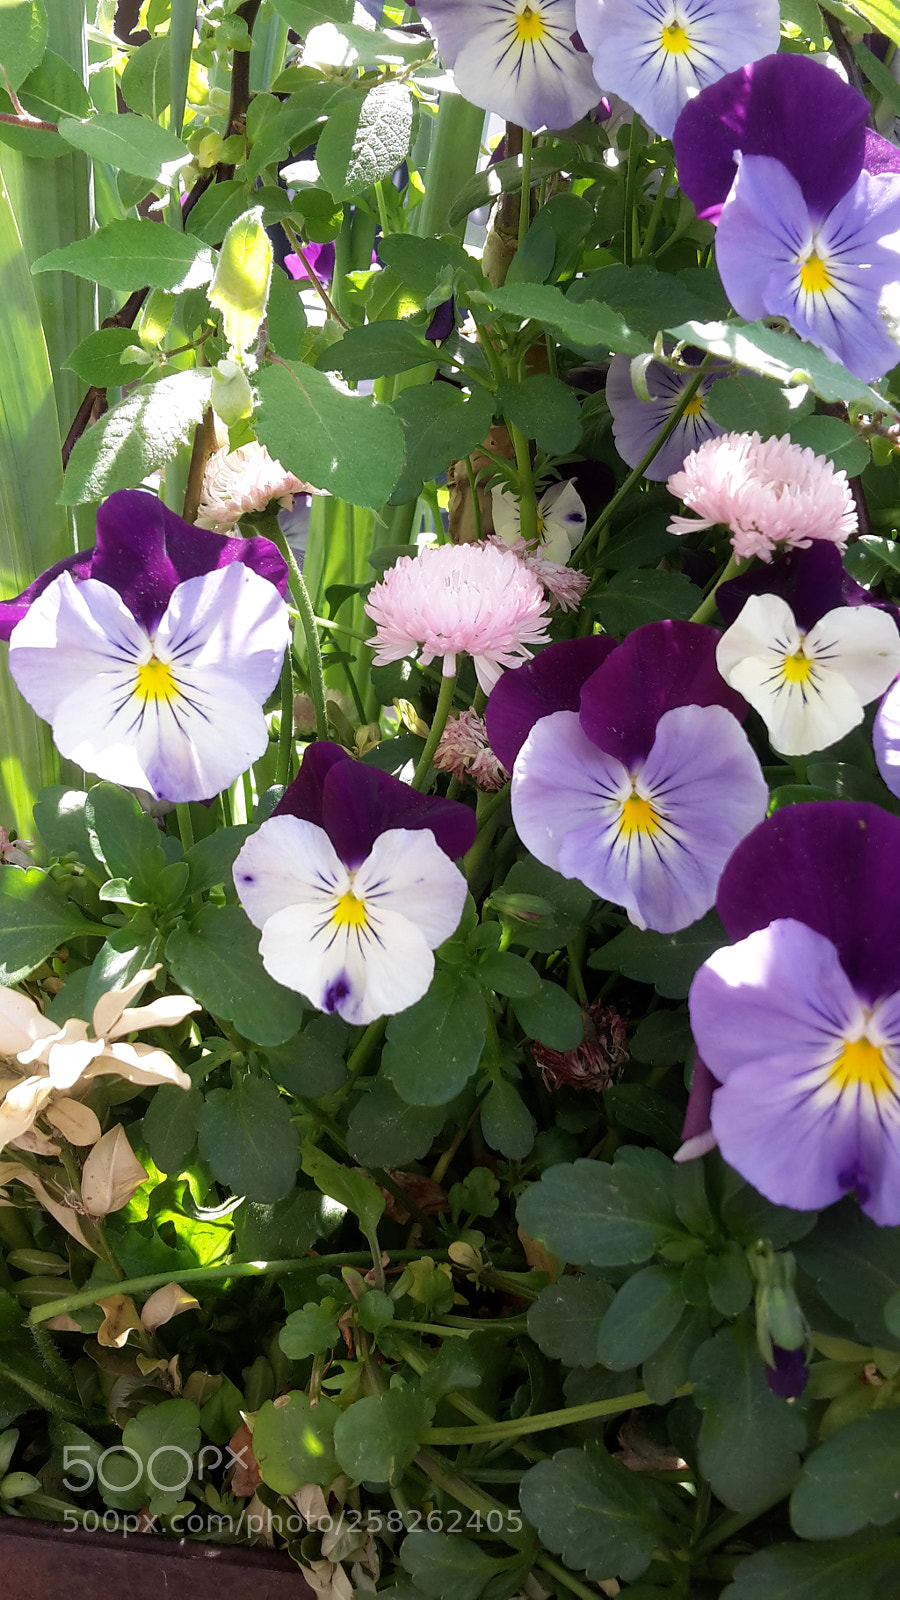 Samsung Galaxy S5 Mini sample photo. A bunch of pansies photography